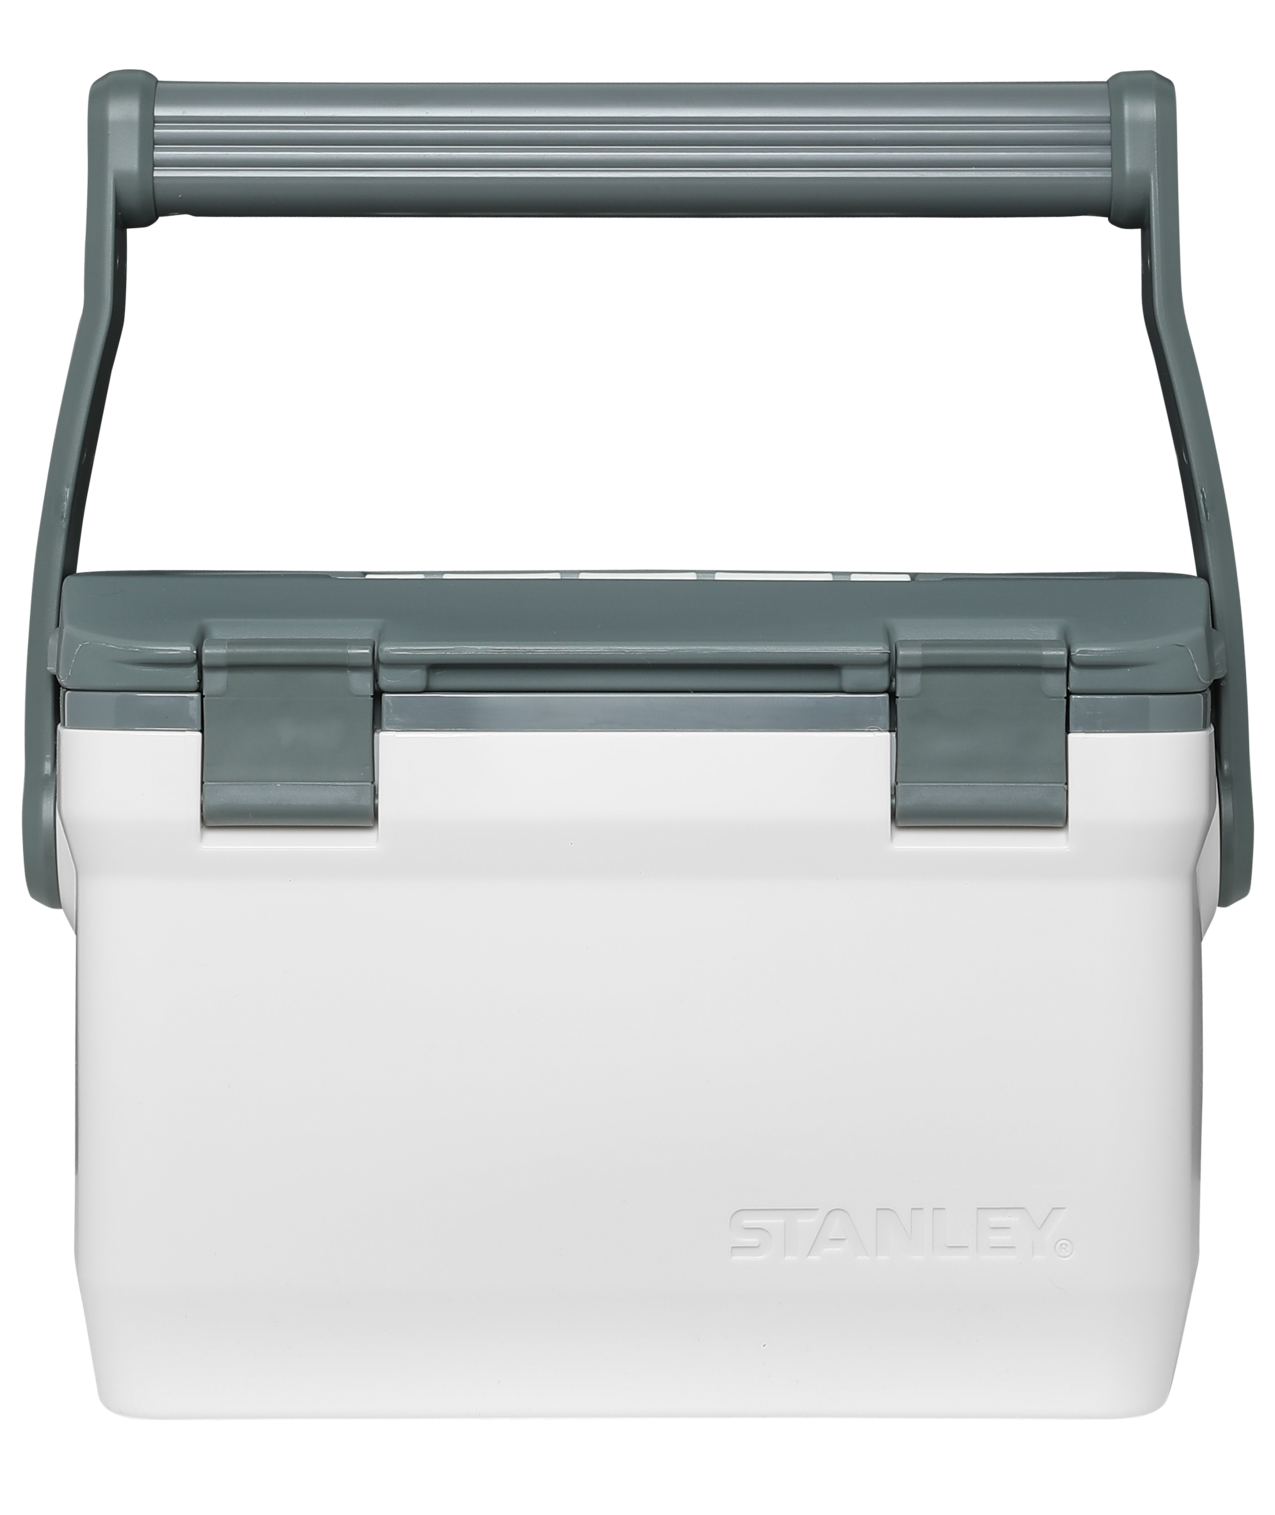 https://www.cup-stanley.com/wp-content/uploads/2023/07/B2B_Web_PNG-Adventure-Easy-Carry-Outdoor-Cooler-Polar-16-QT_1800x1800.png